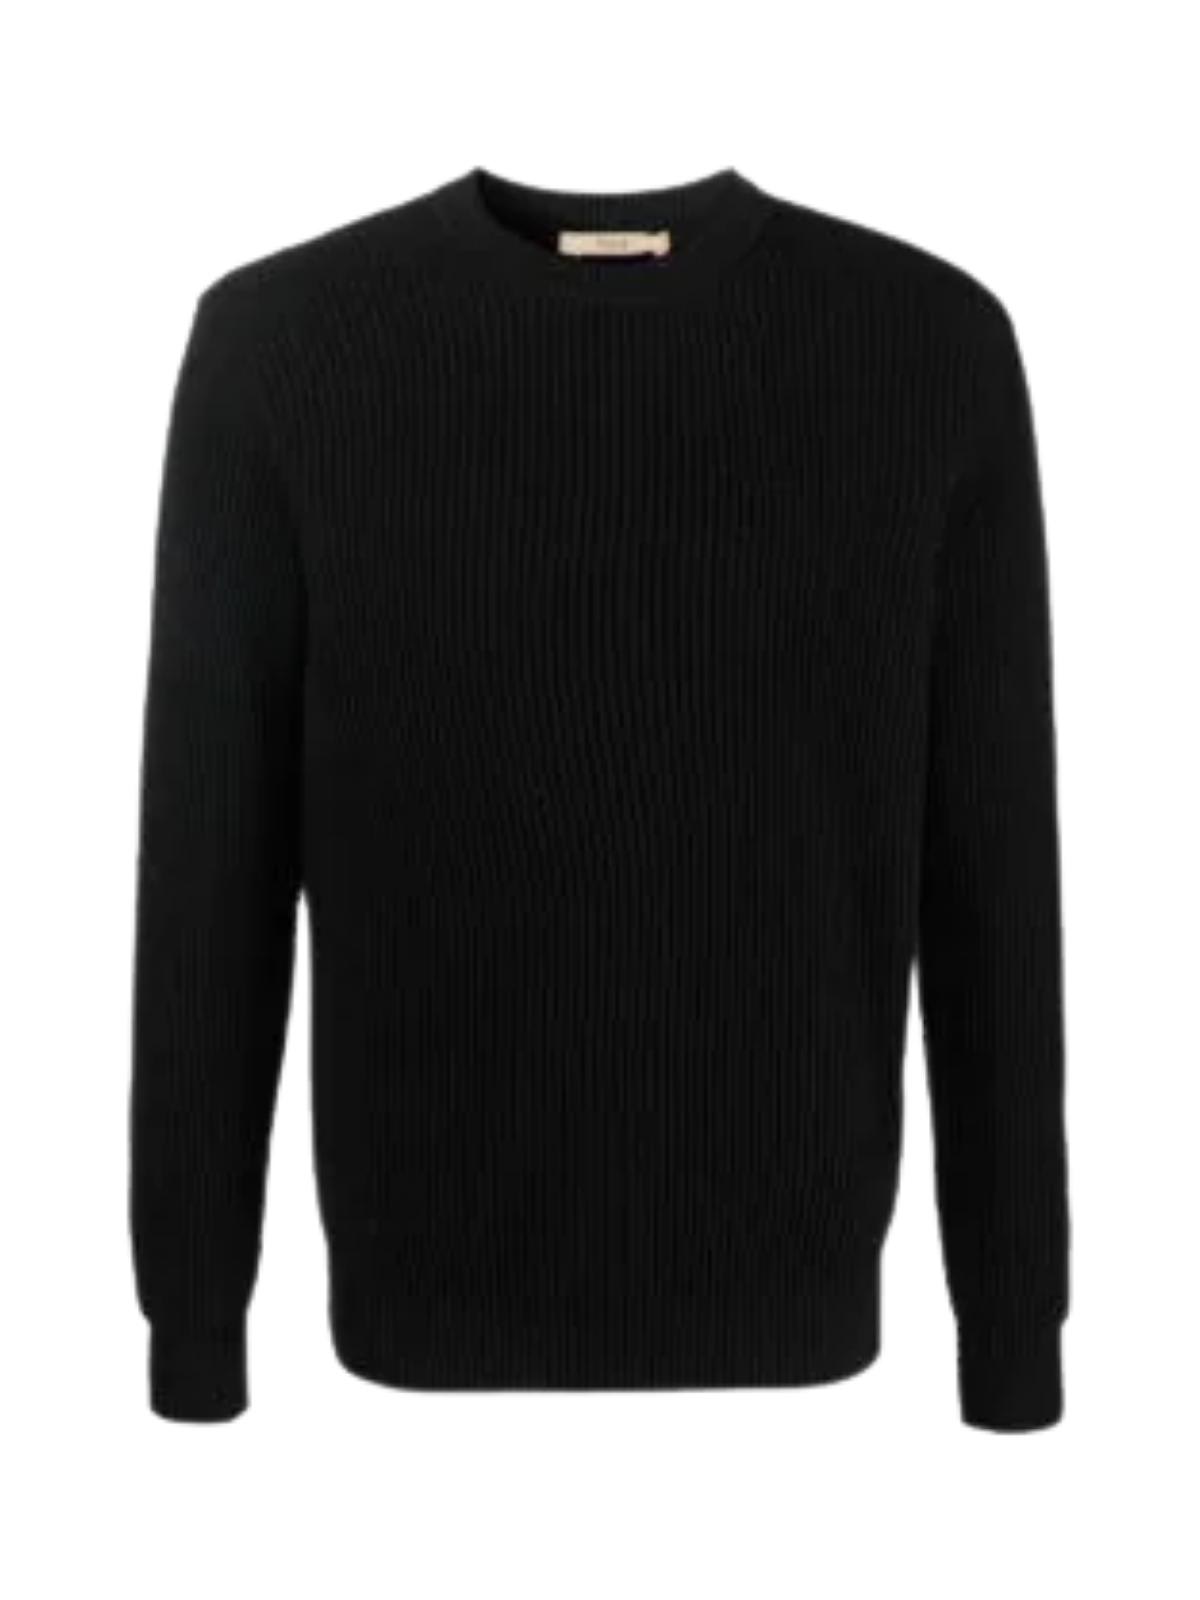 NUUR RIBBED L/S CREW NECK SWEATER